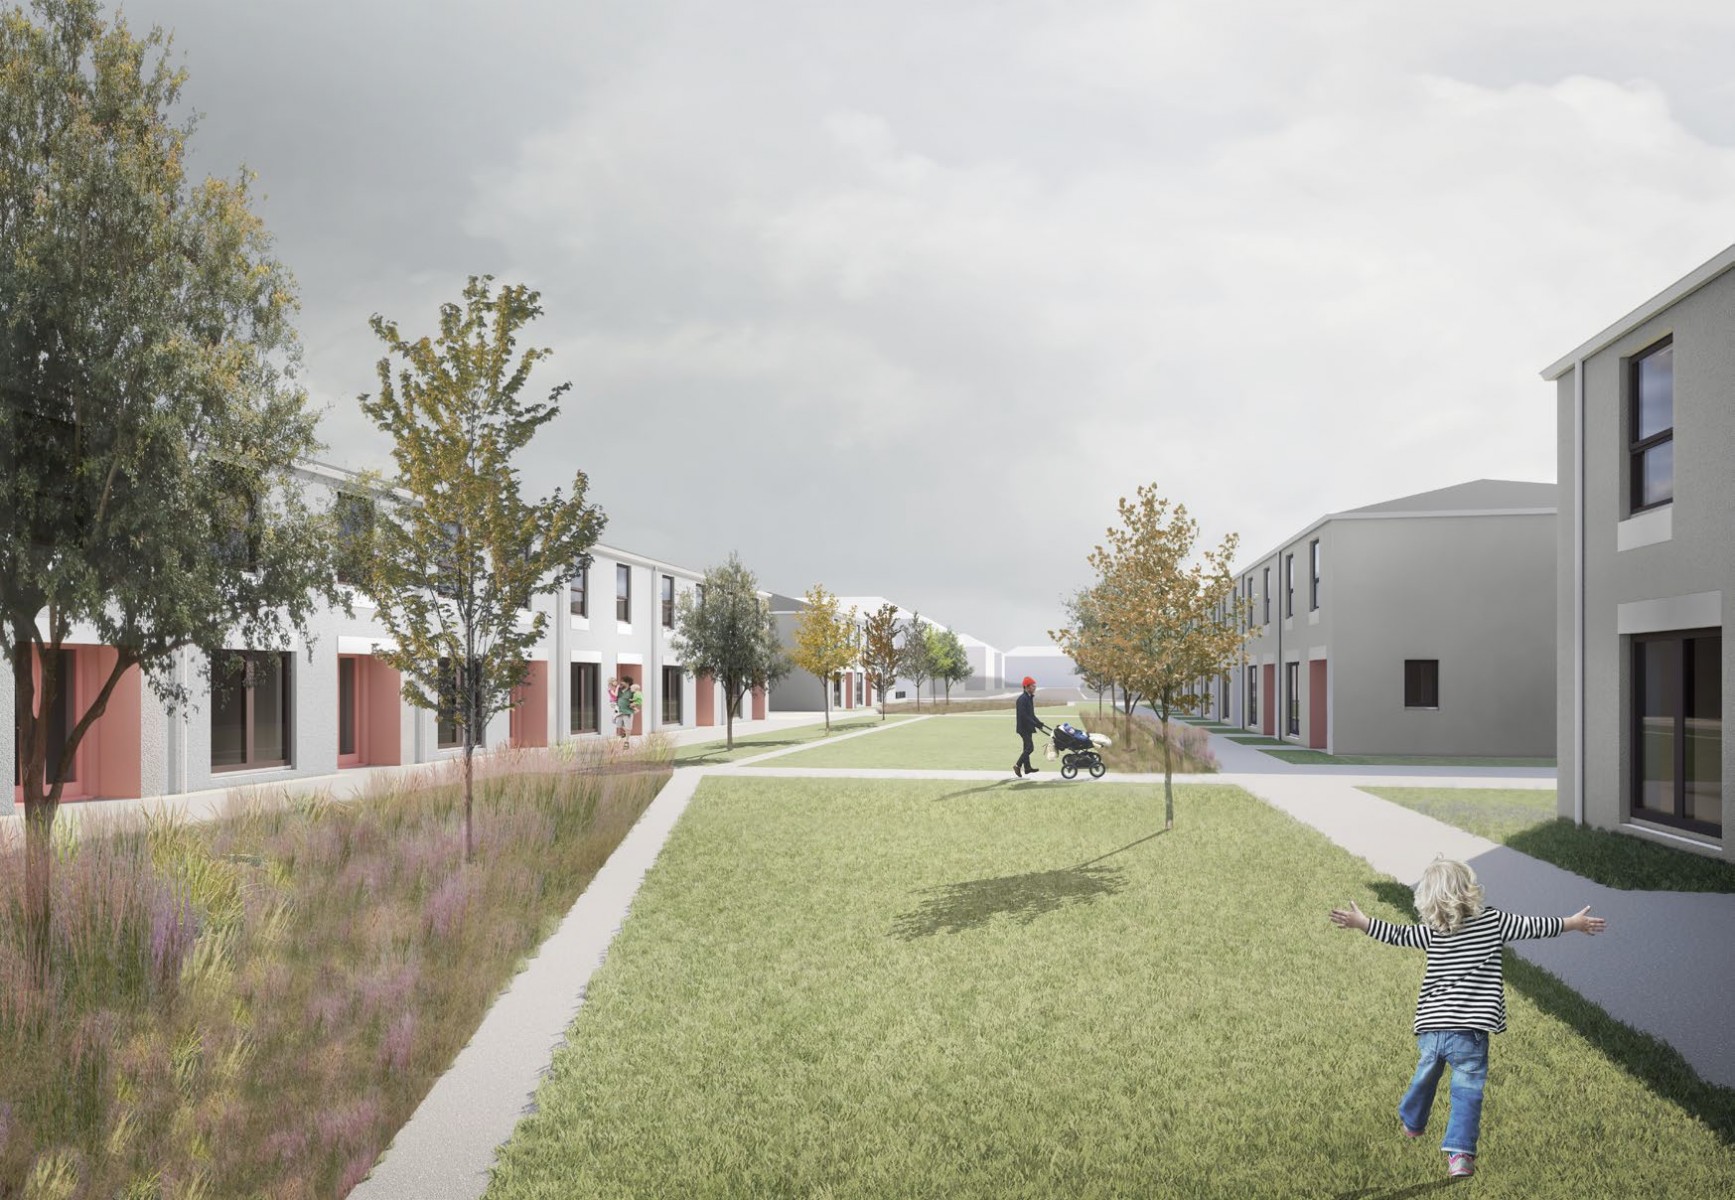 Plans approved for 70 new GHA homes at former school